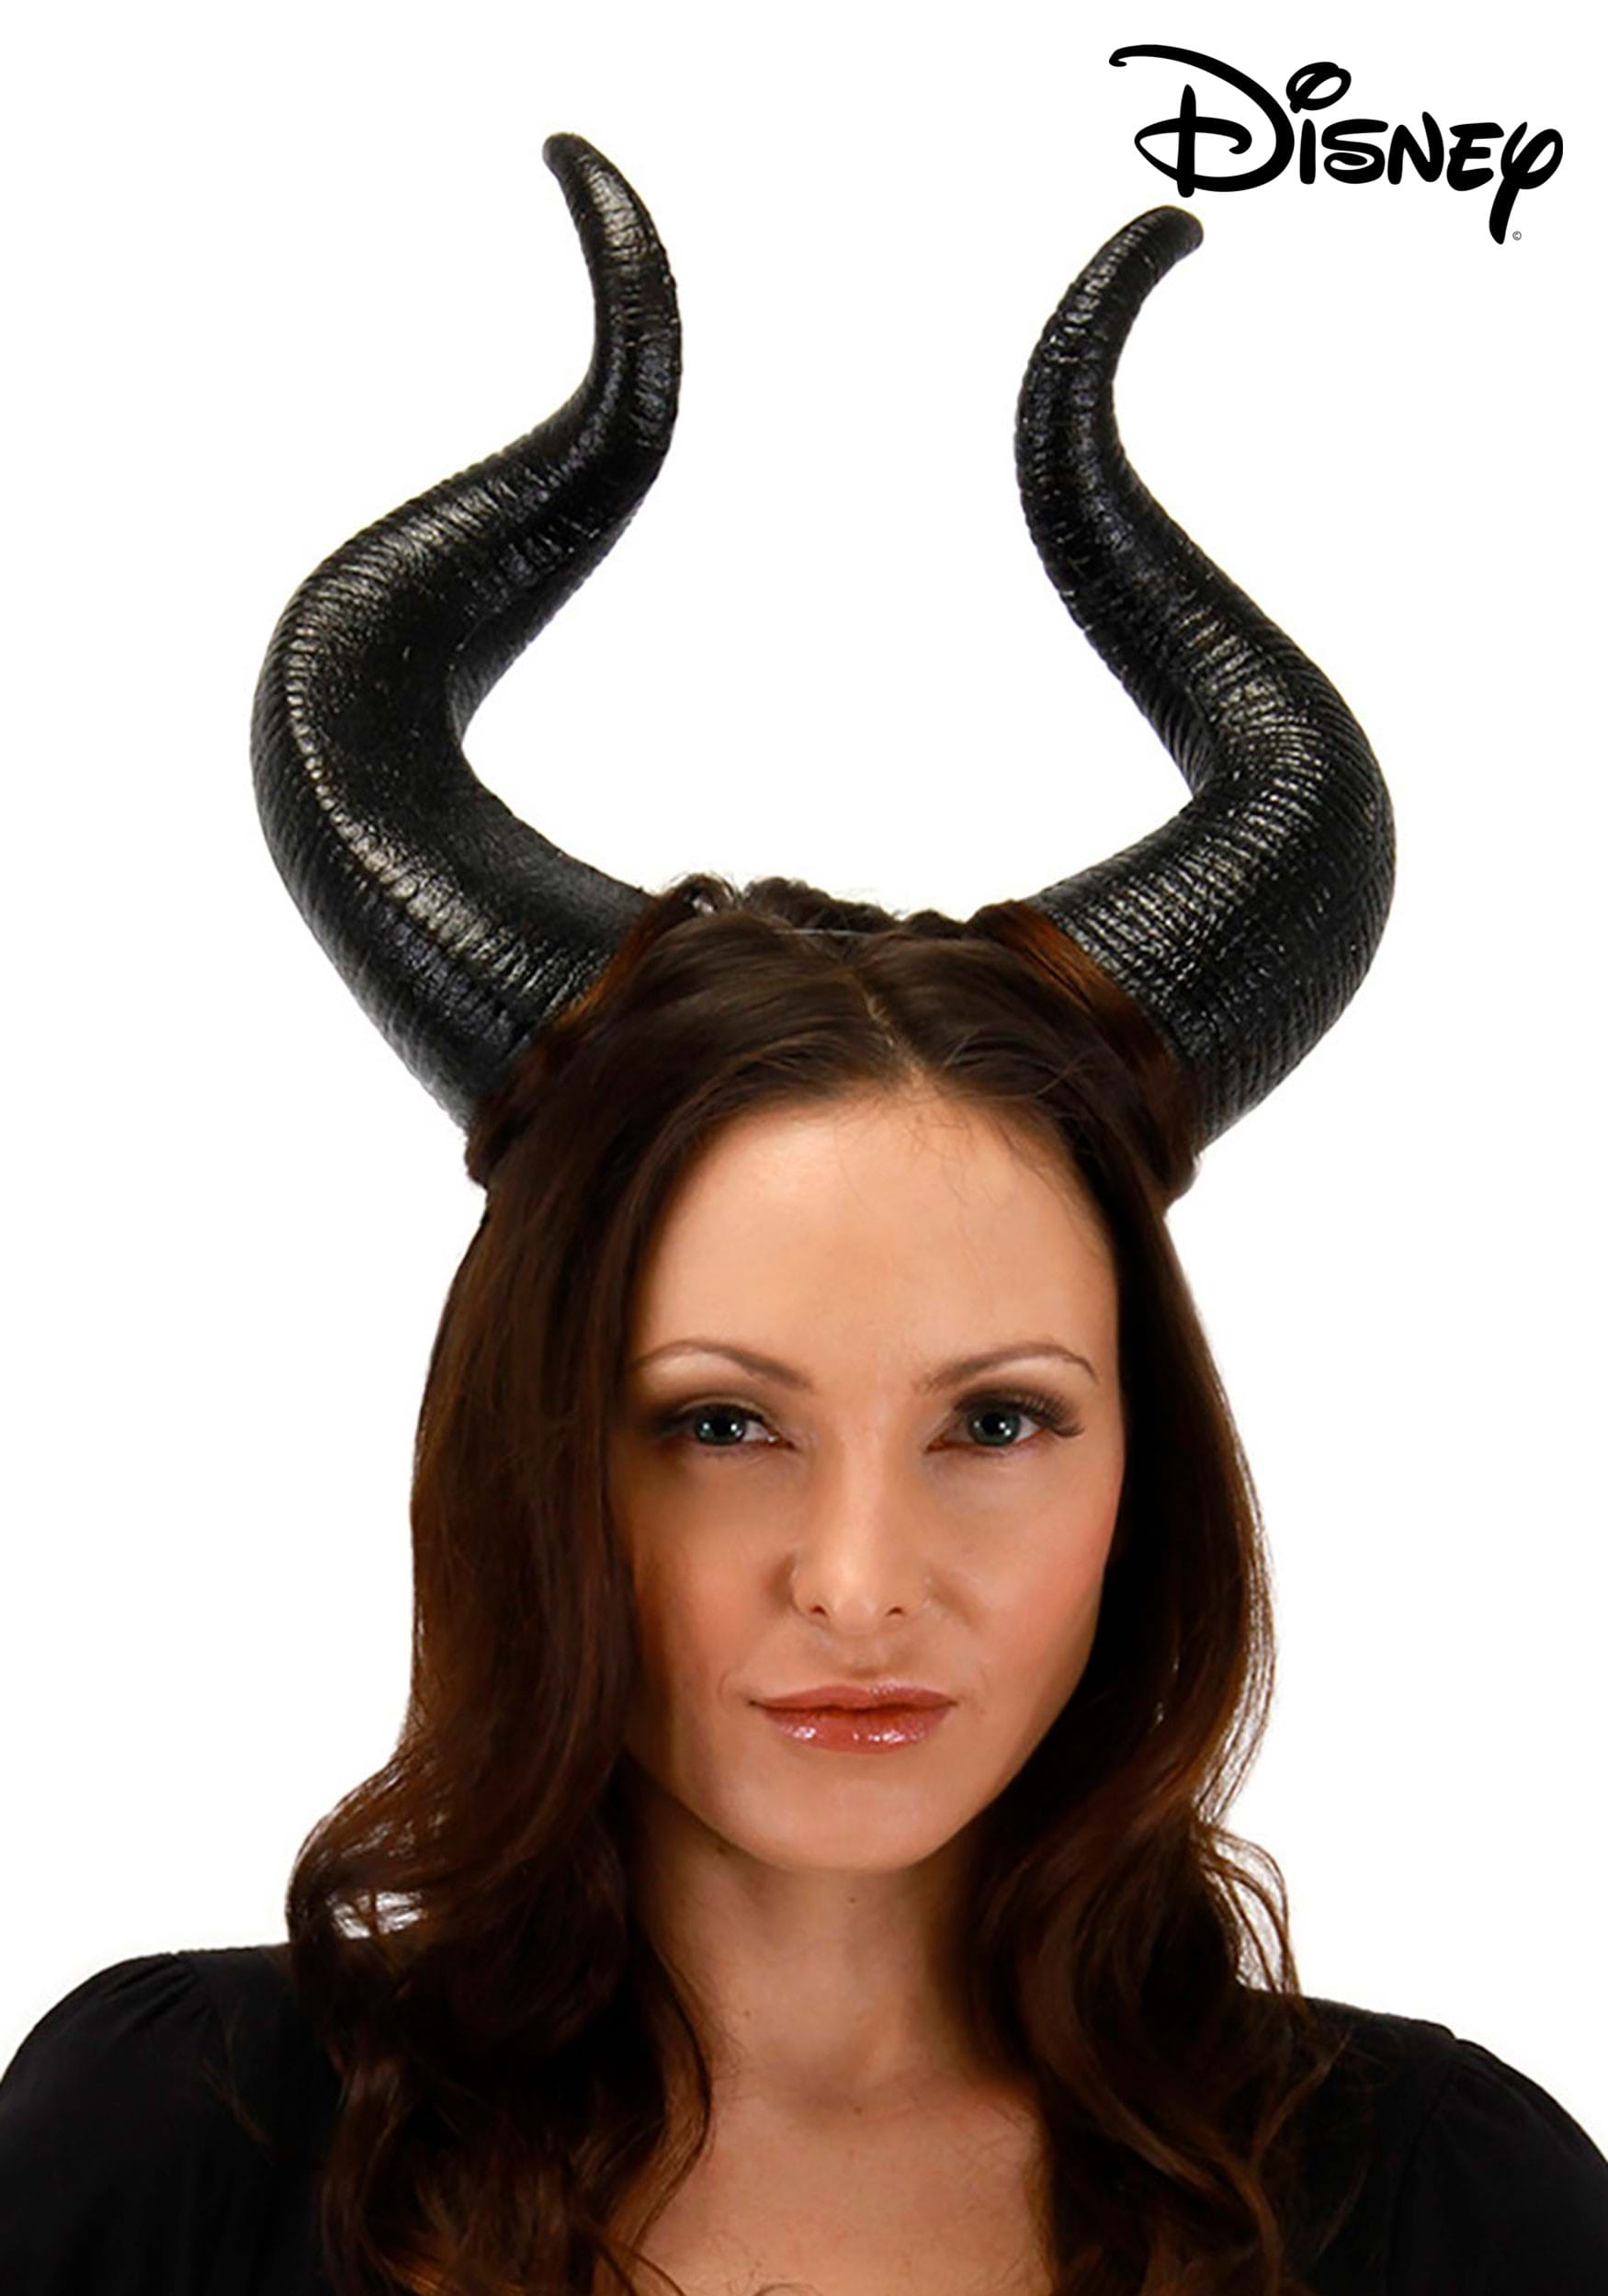 Professional cosplay Large 10 inch Maleficent horns only 3D printed lightweight Goat Maleficent-style horned headband 